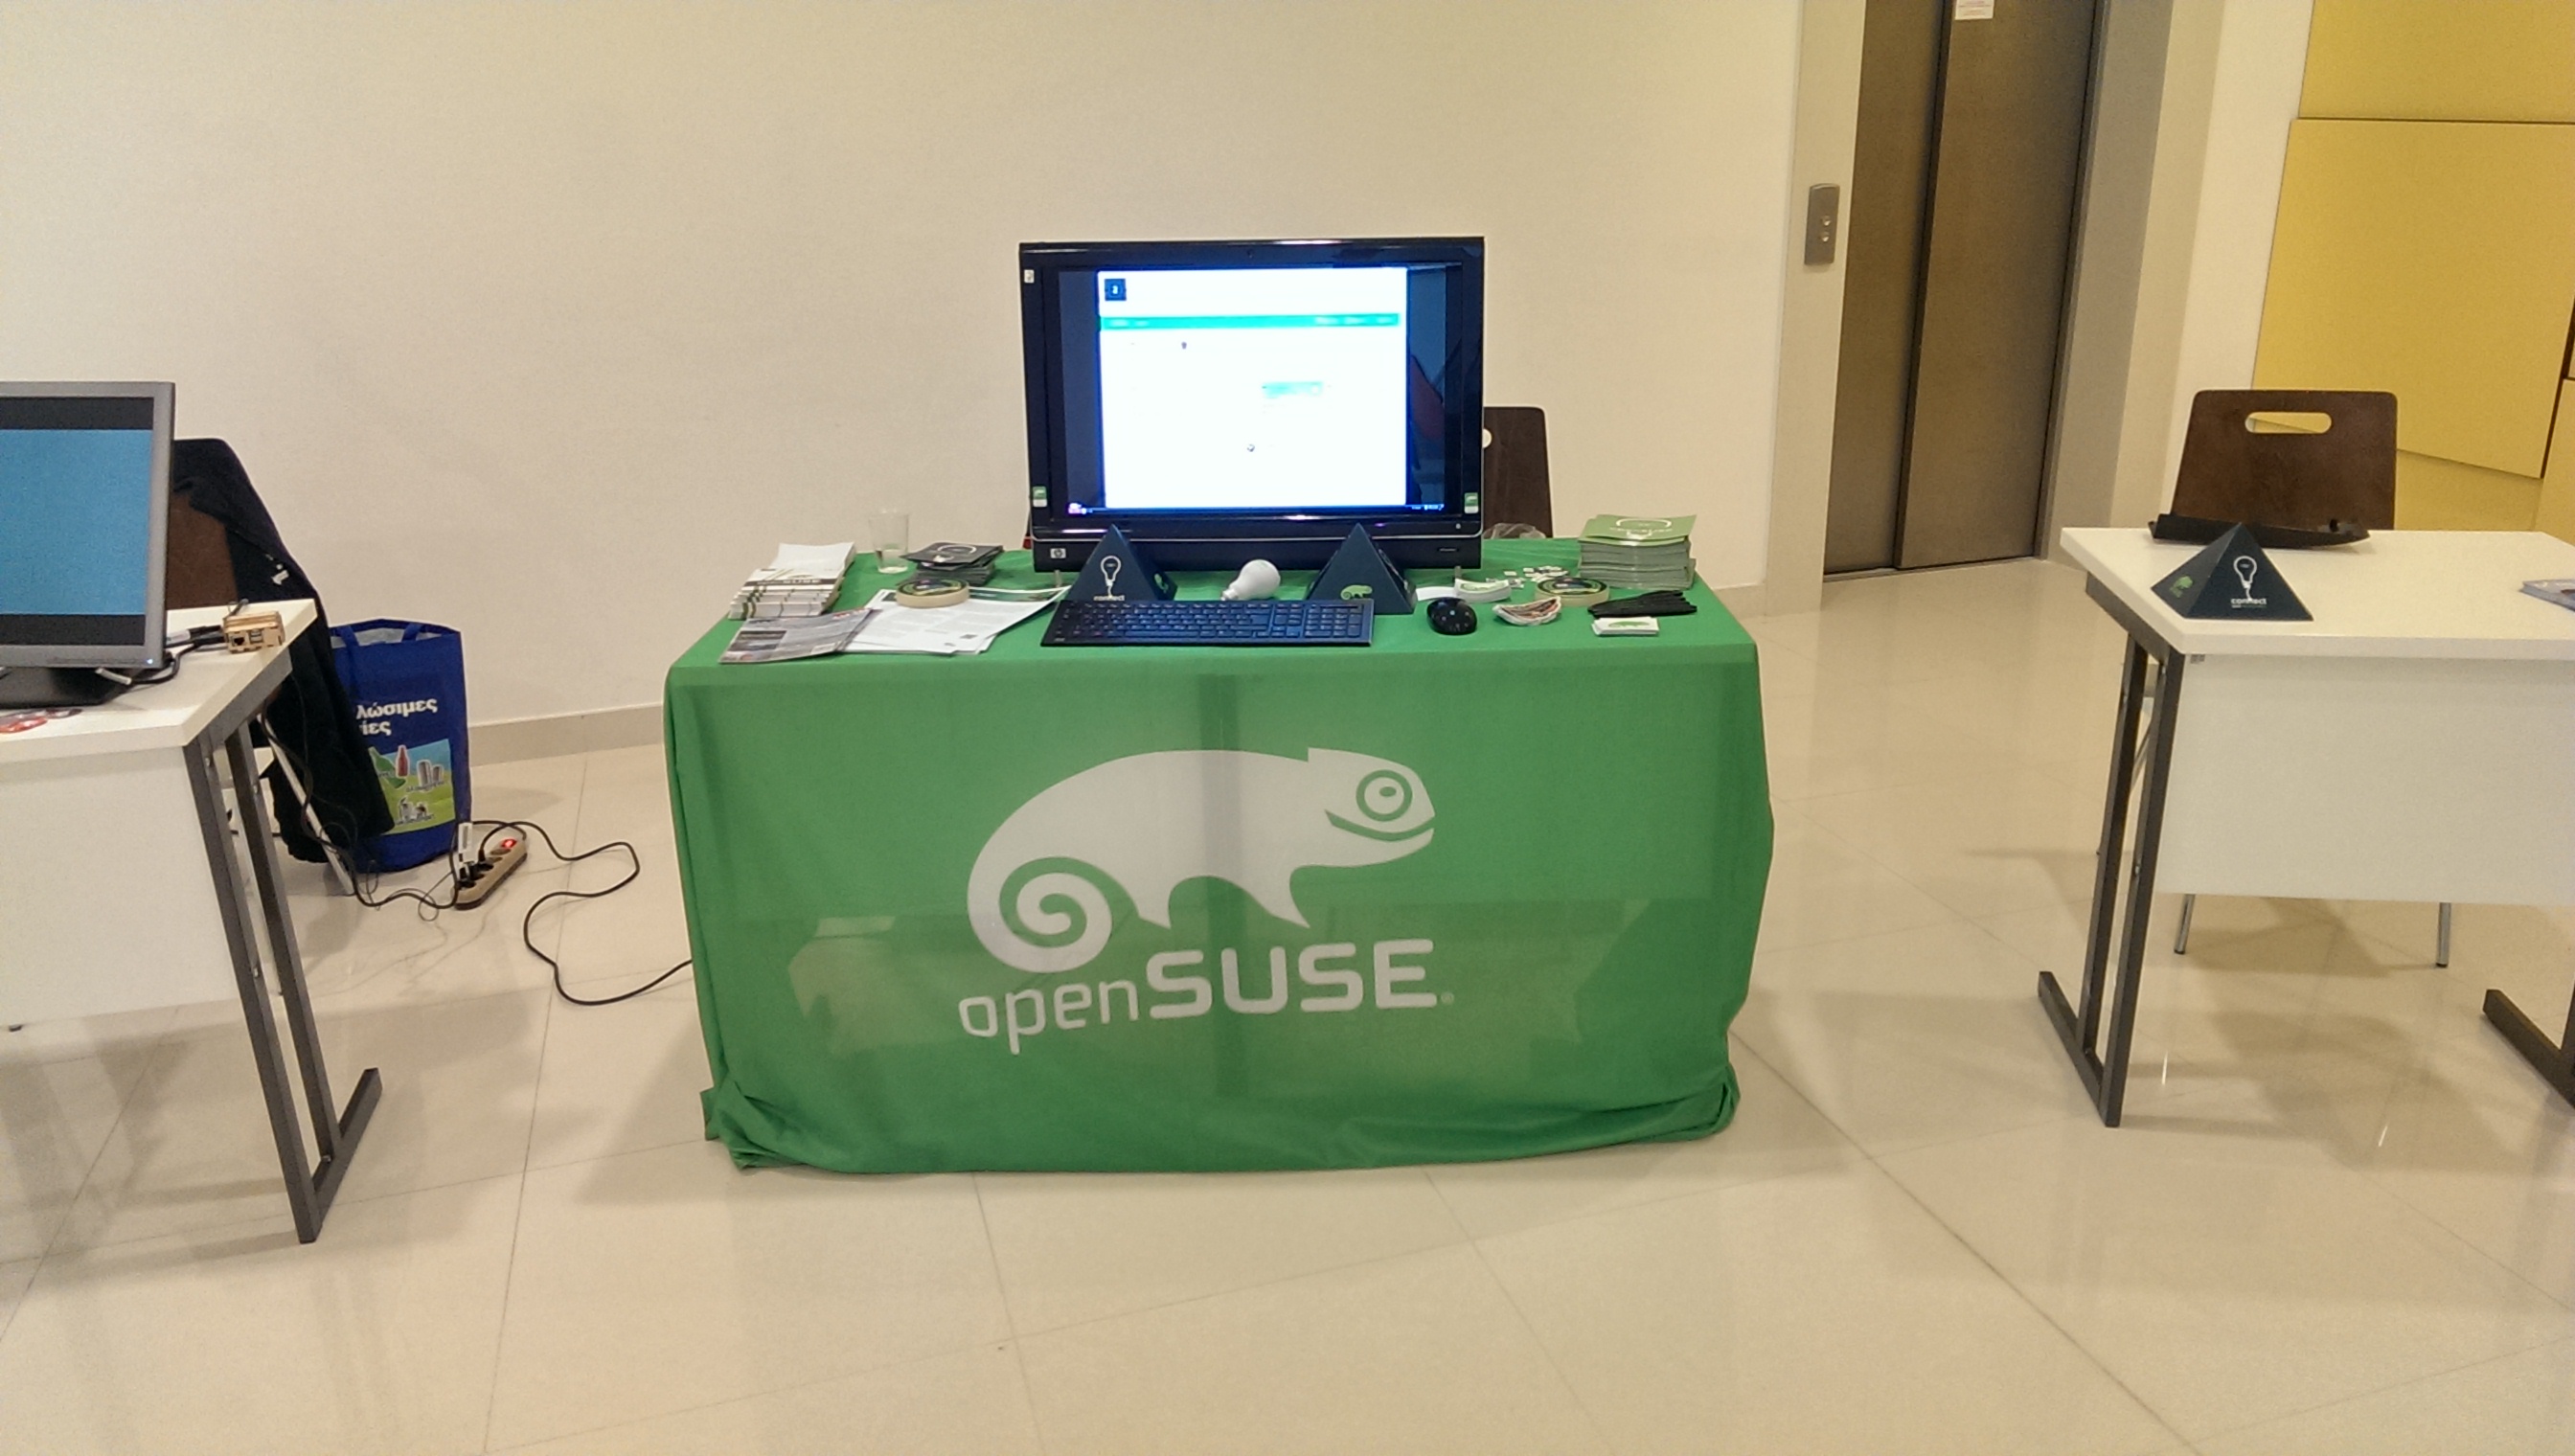 openSUSE Booth